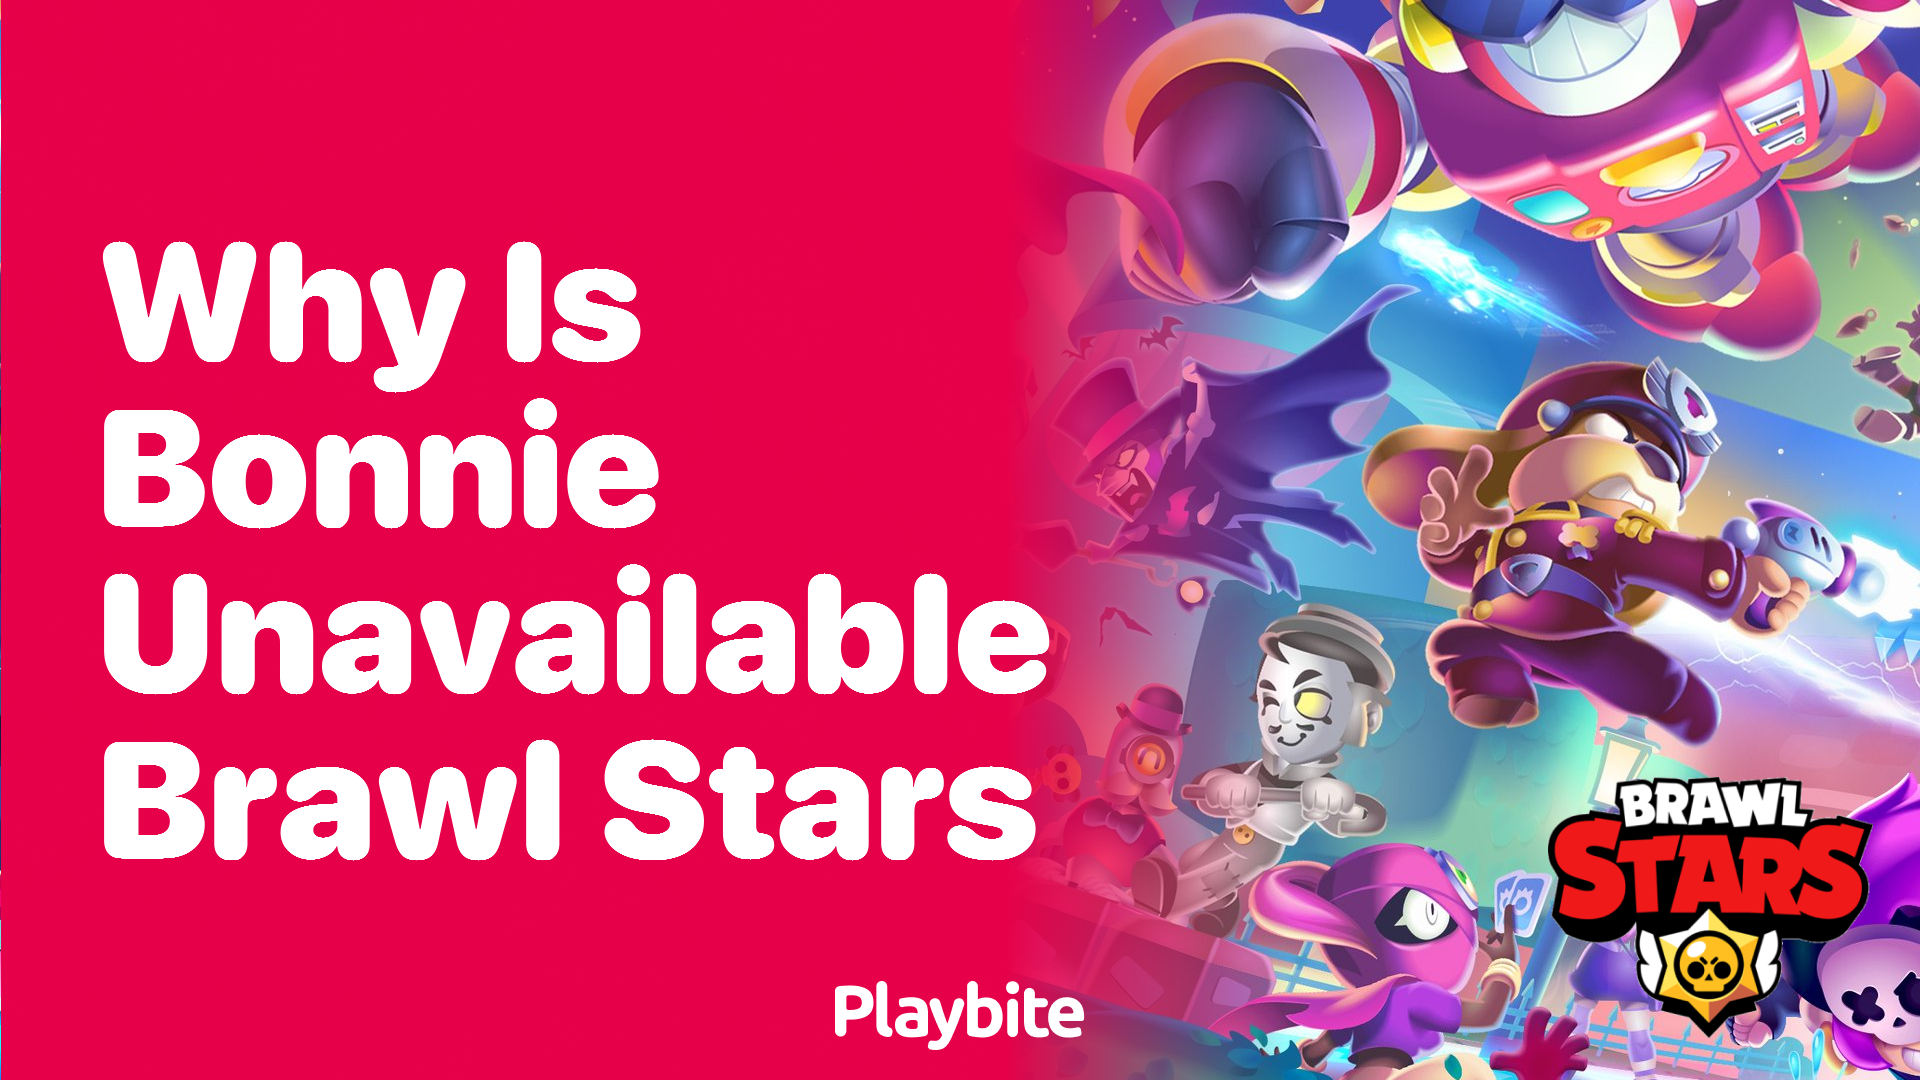 Why is Bonnie Unavailable in Brawl Stars?